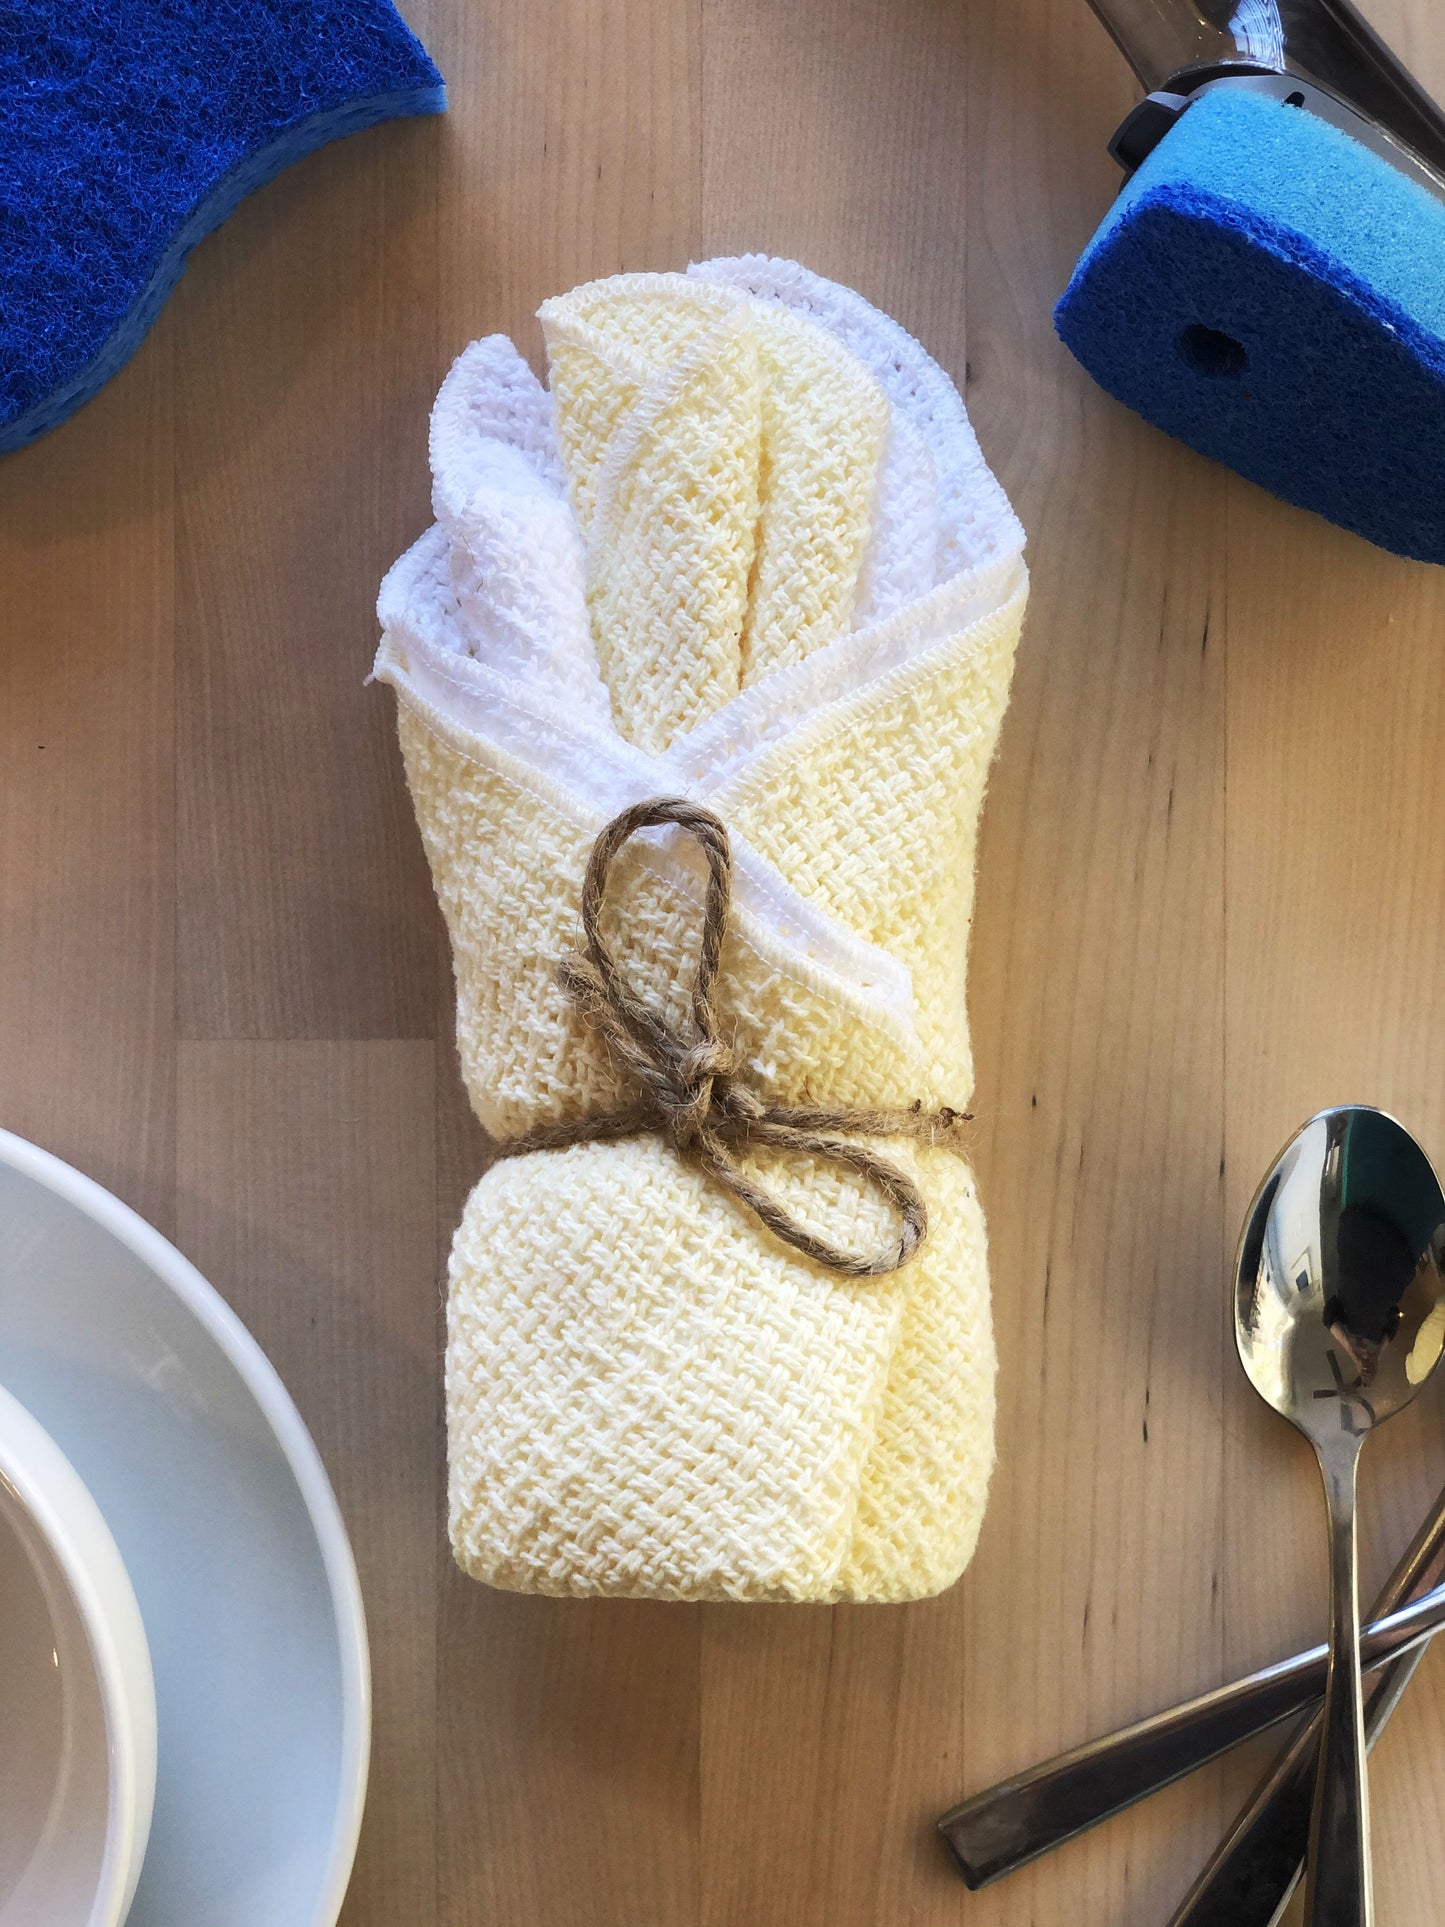 Made in the USA Dish Cloths - Set of 4 - American Made Dish Cloths Towels - American Home USA - Yellow and White